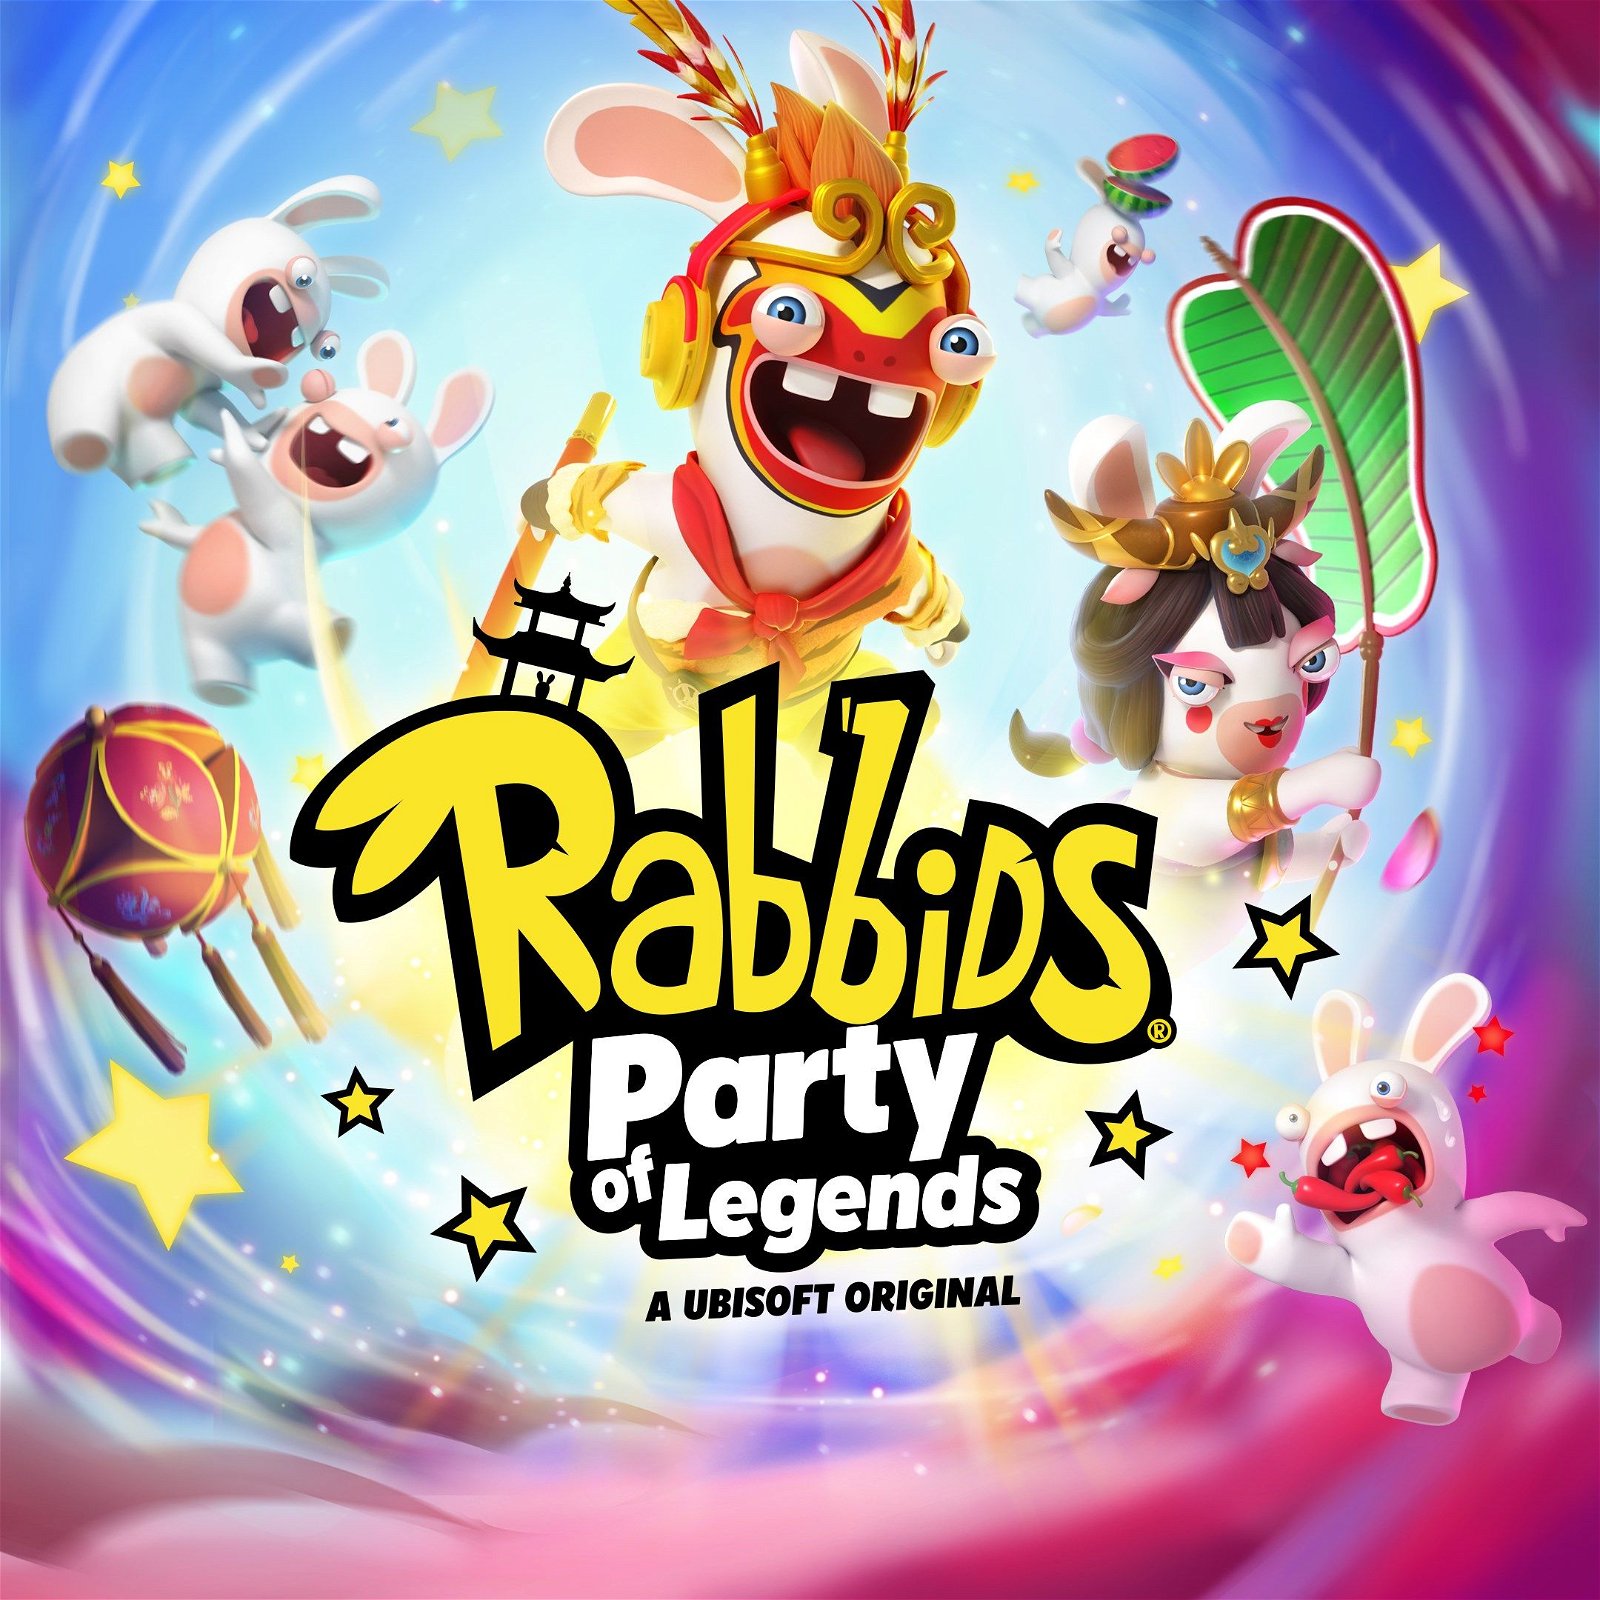 Image of Rabbids: Party of Legends